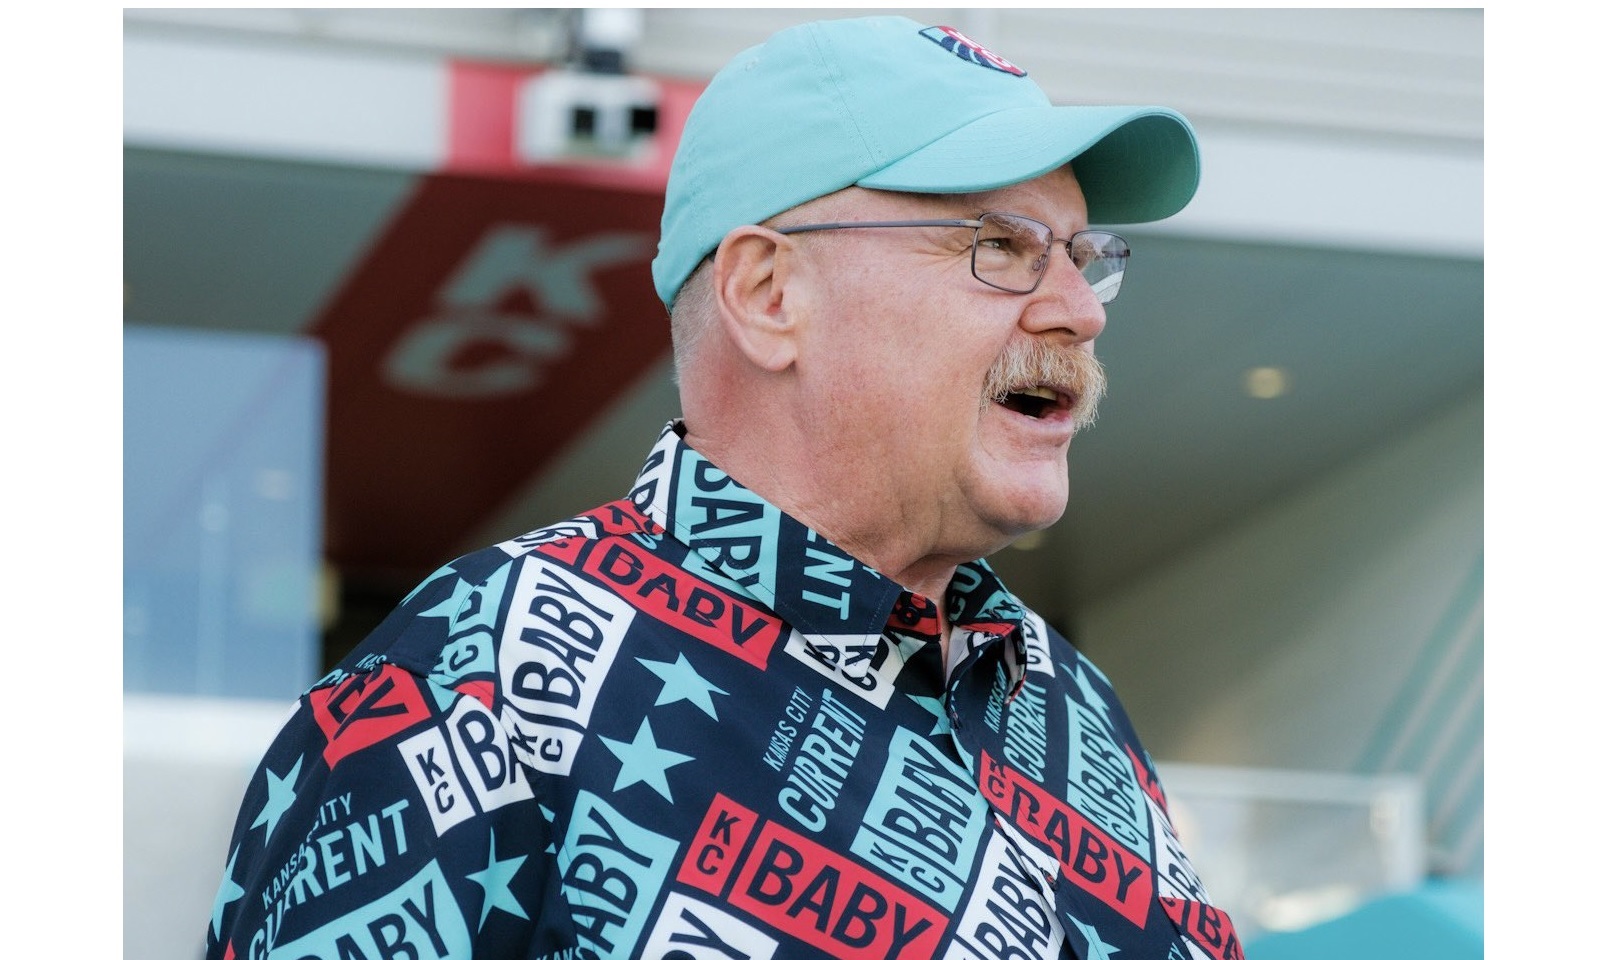 Chiefs’ Andy Reid led ‘KC Baby’ chant at Current game, and fans loved his shirt....Big Red definitely understood the assignment